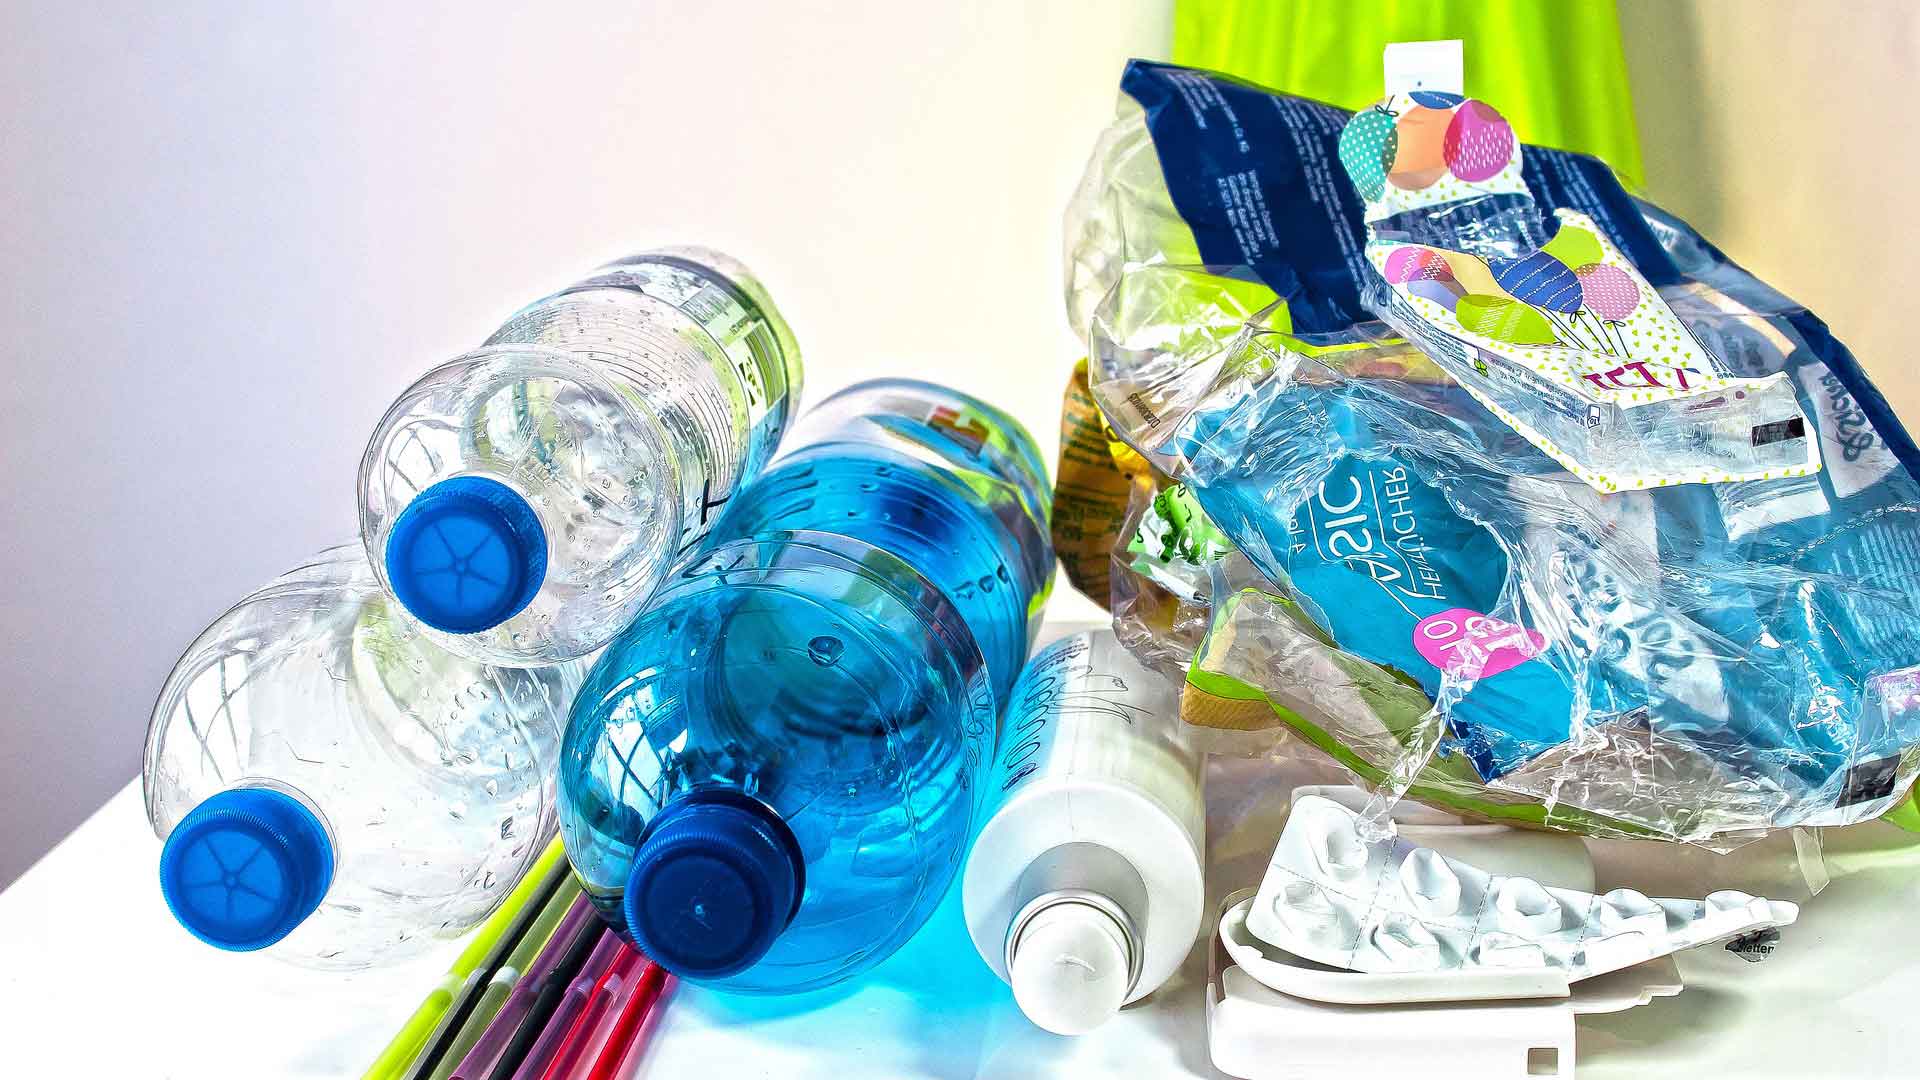 A bunch of plastic waste, primarily water bottles